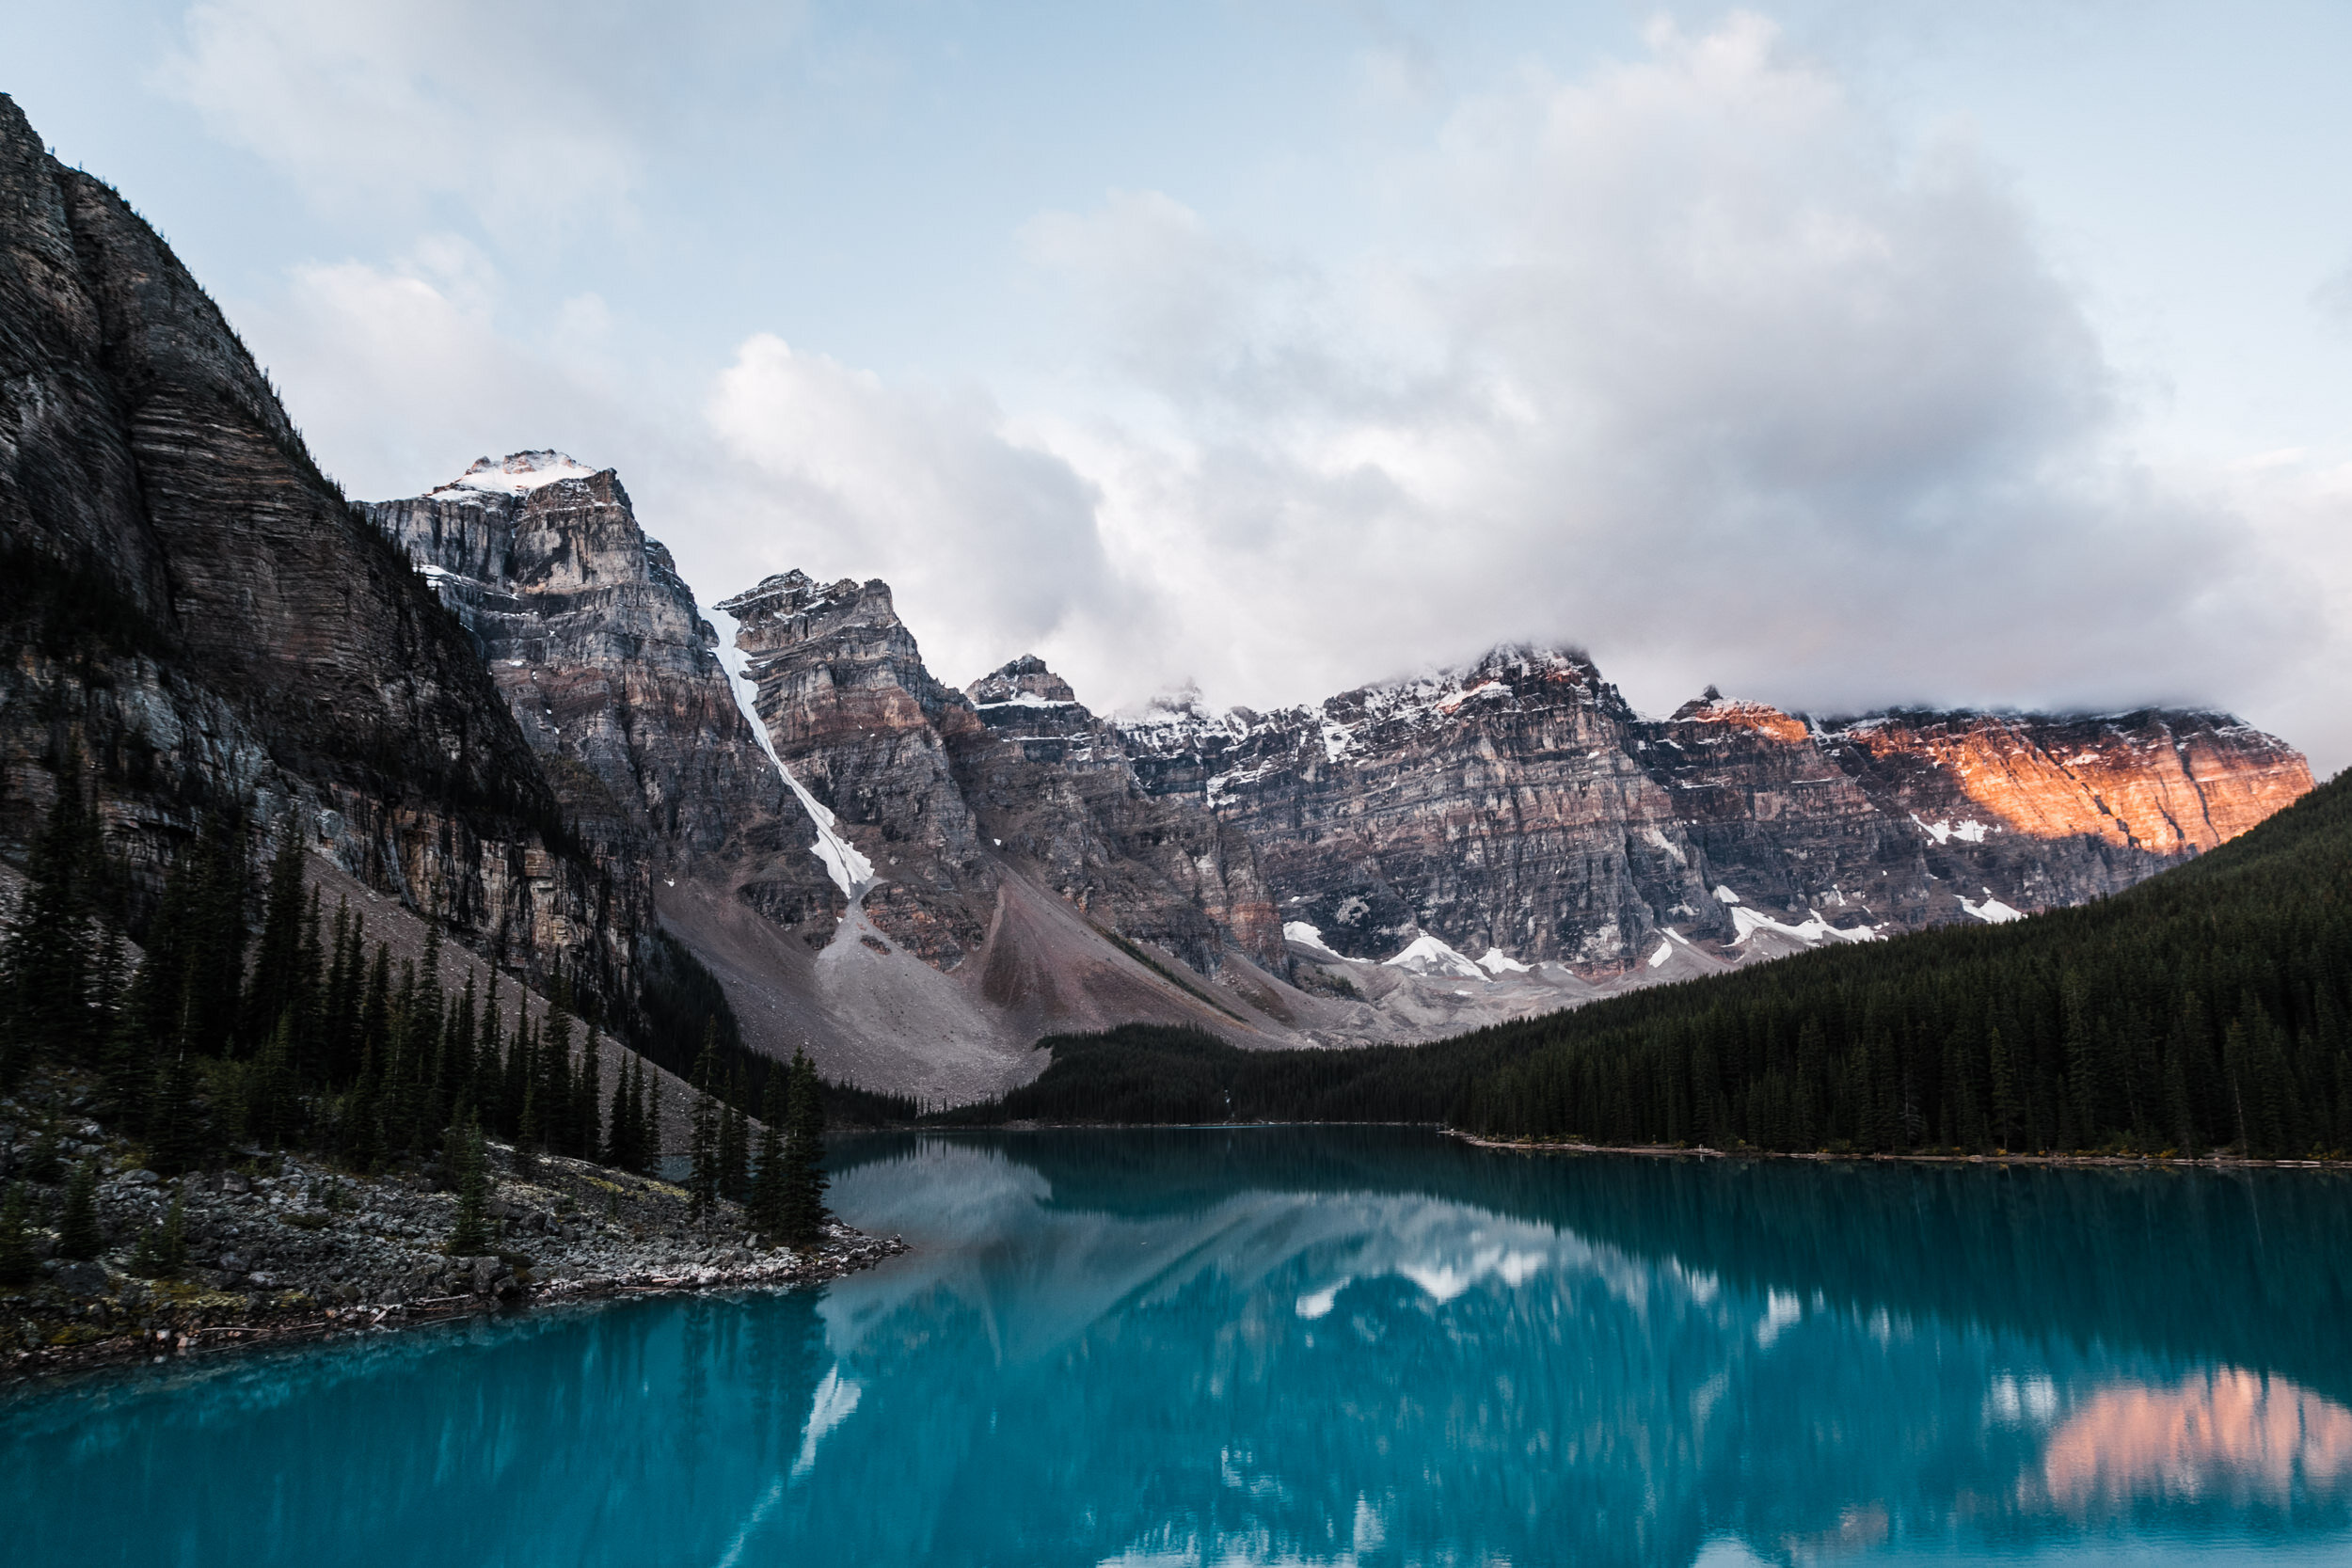 Sunrise First look + Canoeing on Moraine Lake in Banff National Park | The Hearnes Adventure Wedding Photography